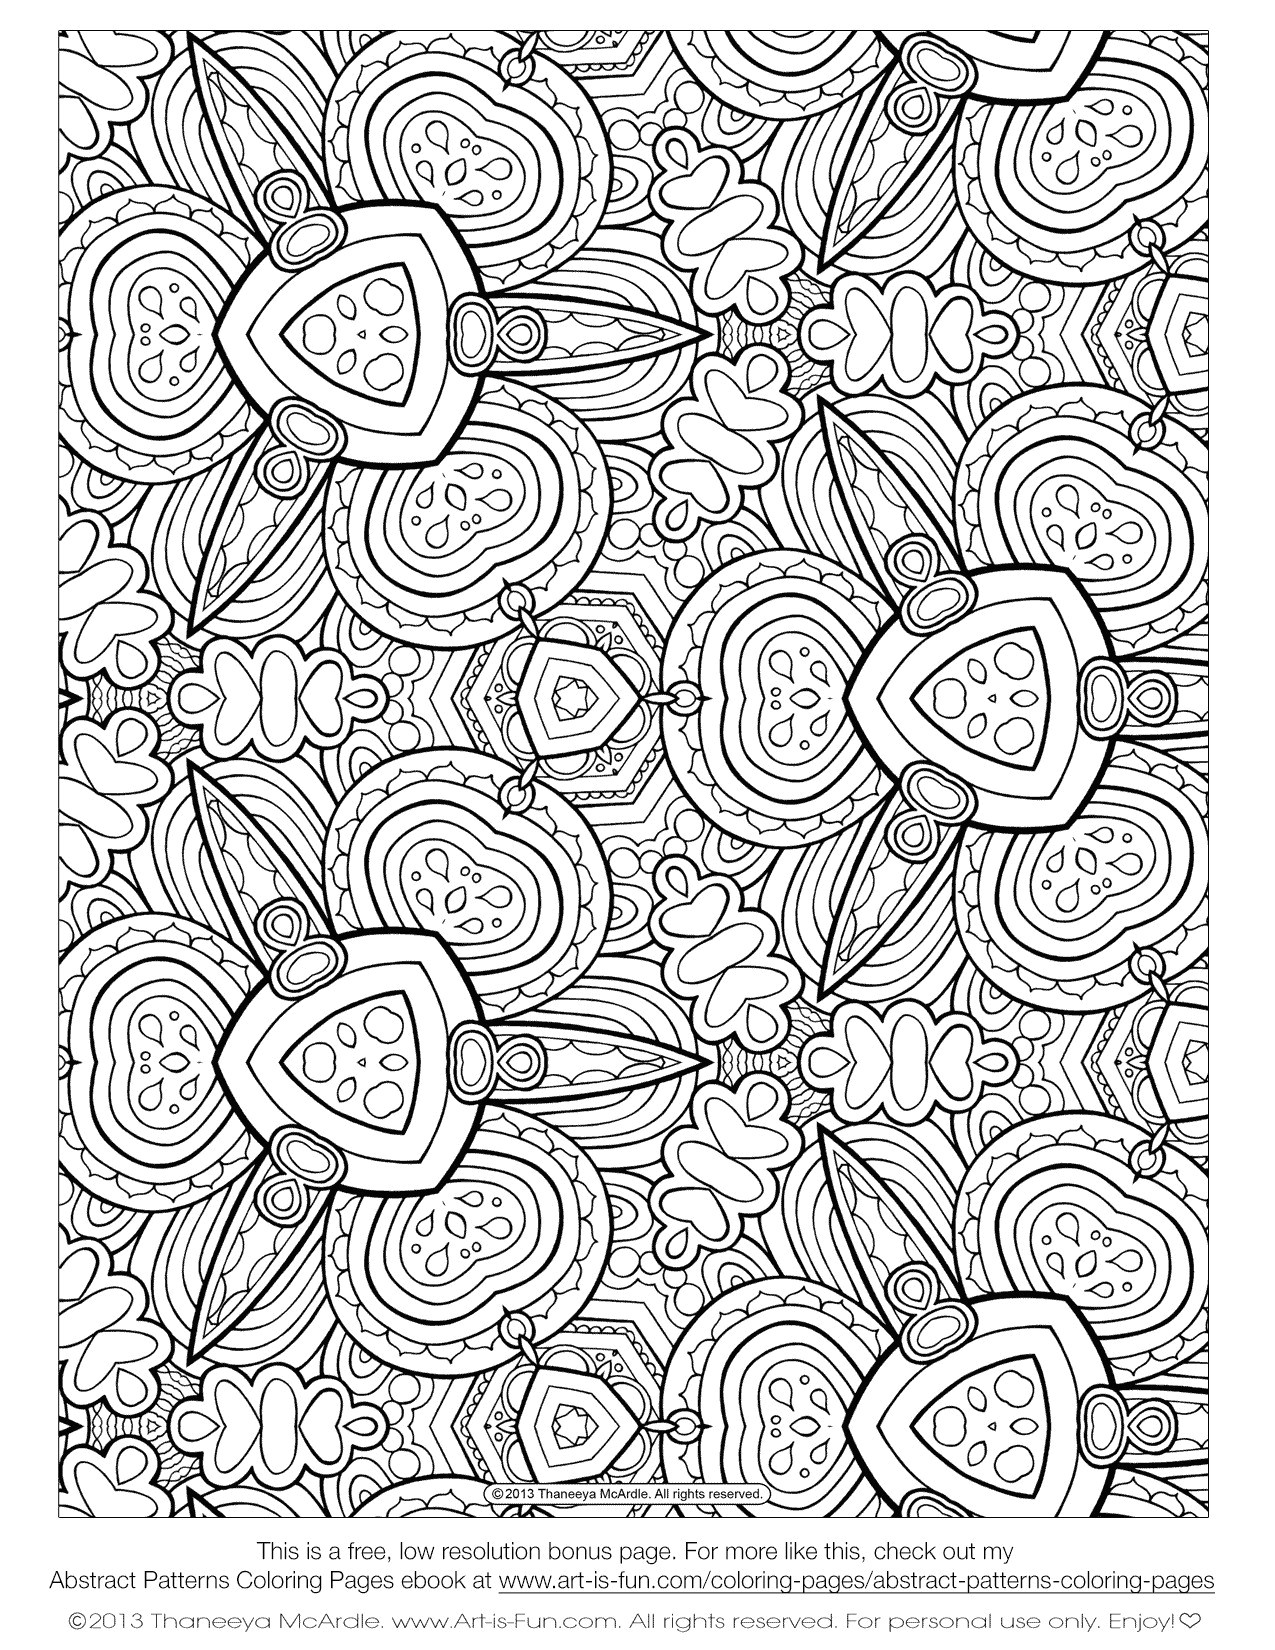 Cool Drawings Of Roses and Hearts Cool Drawings Of Roses and Hearts Beautiful Free Coloring Page Maker